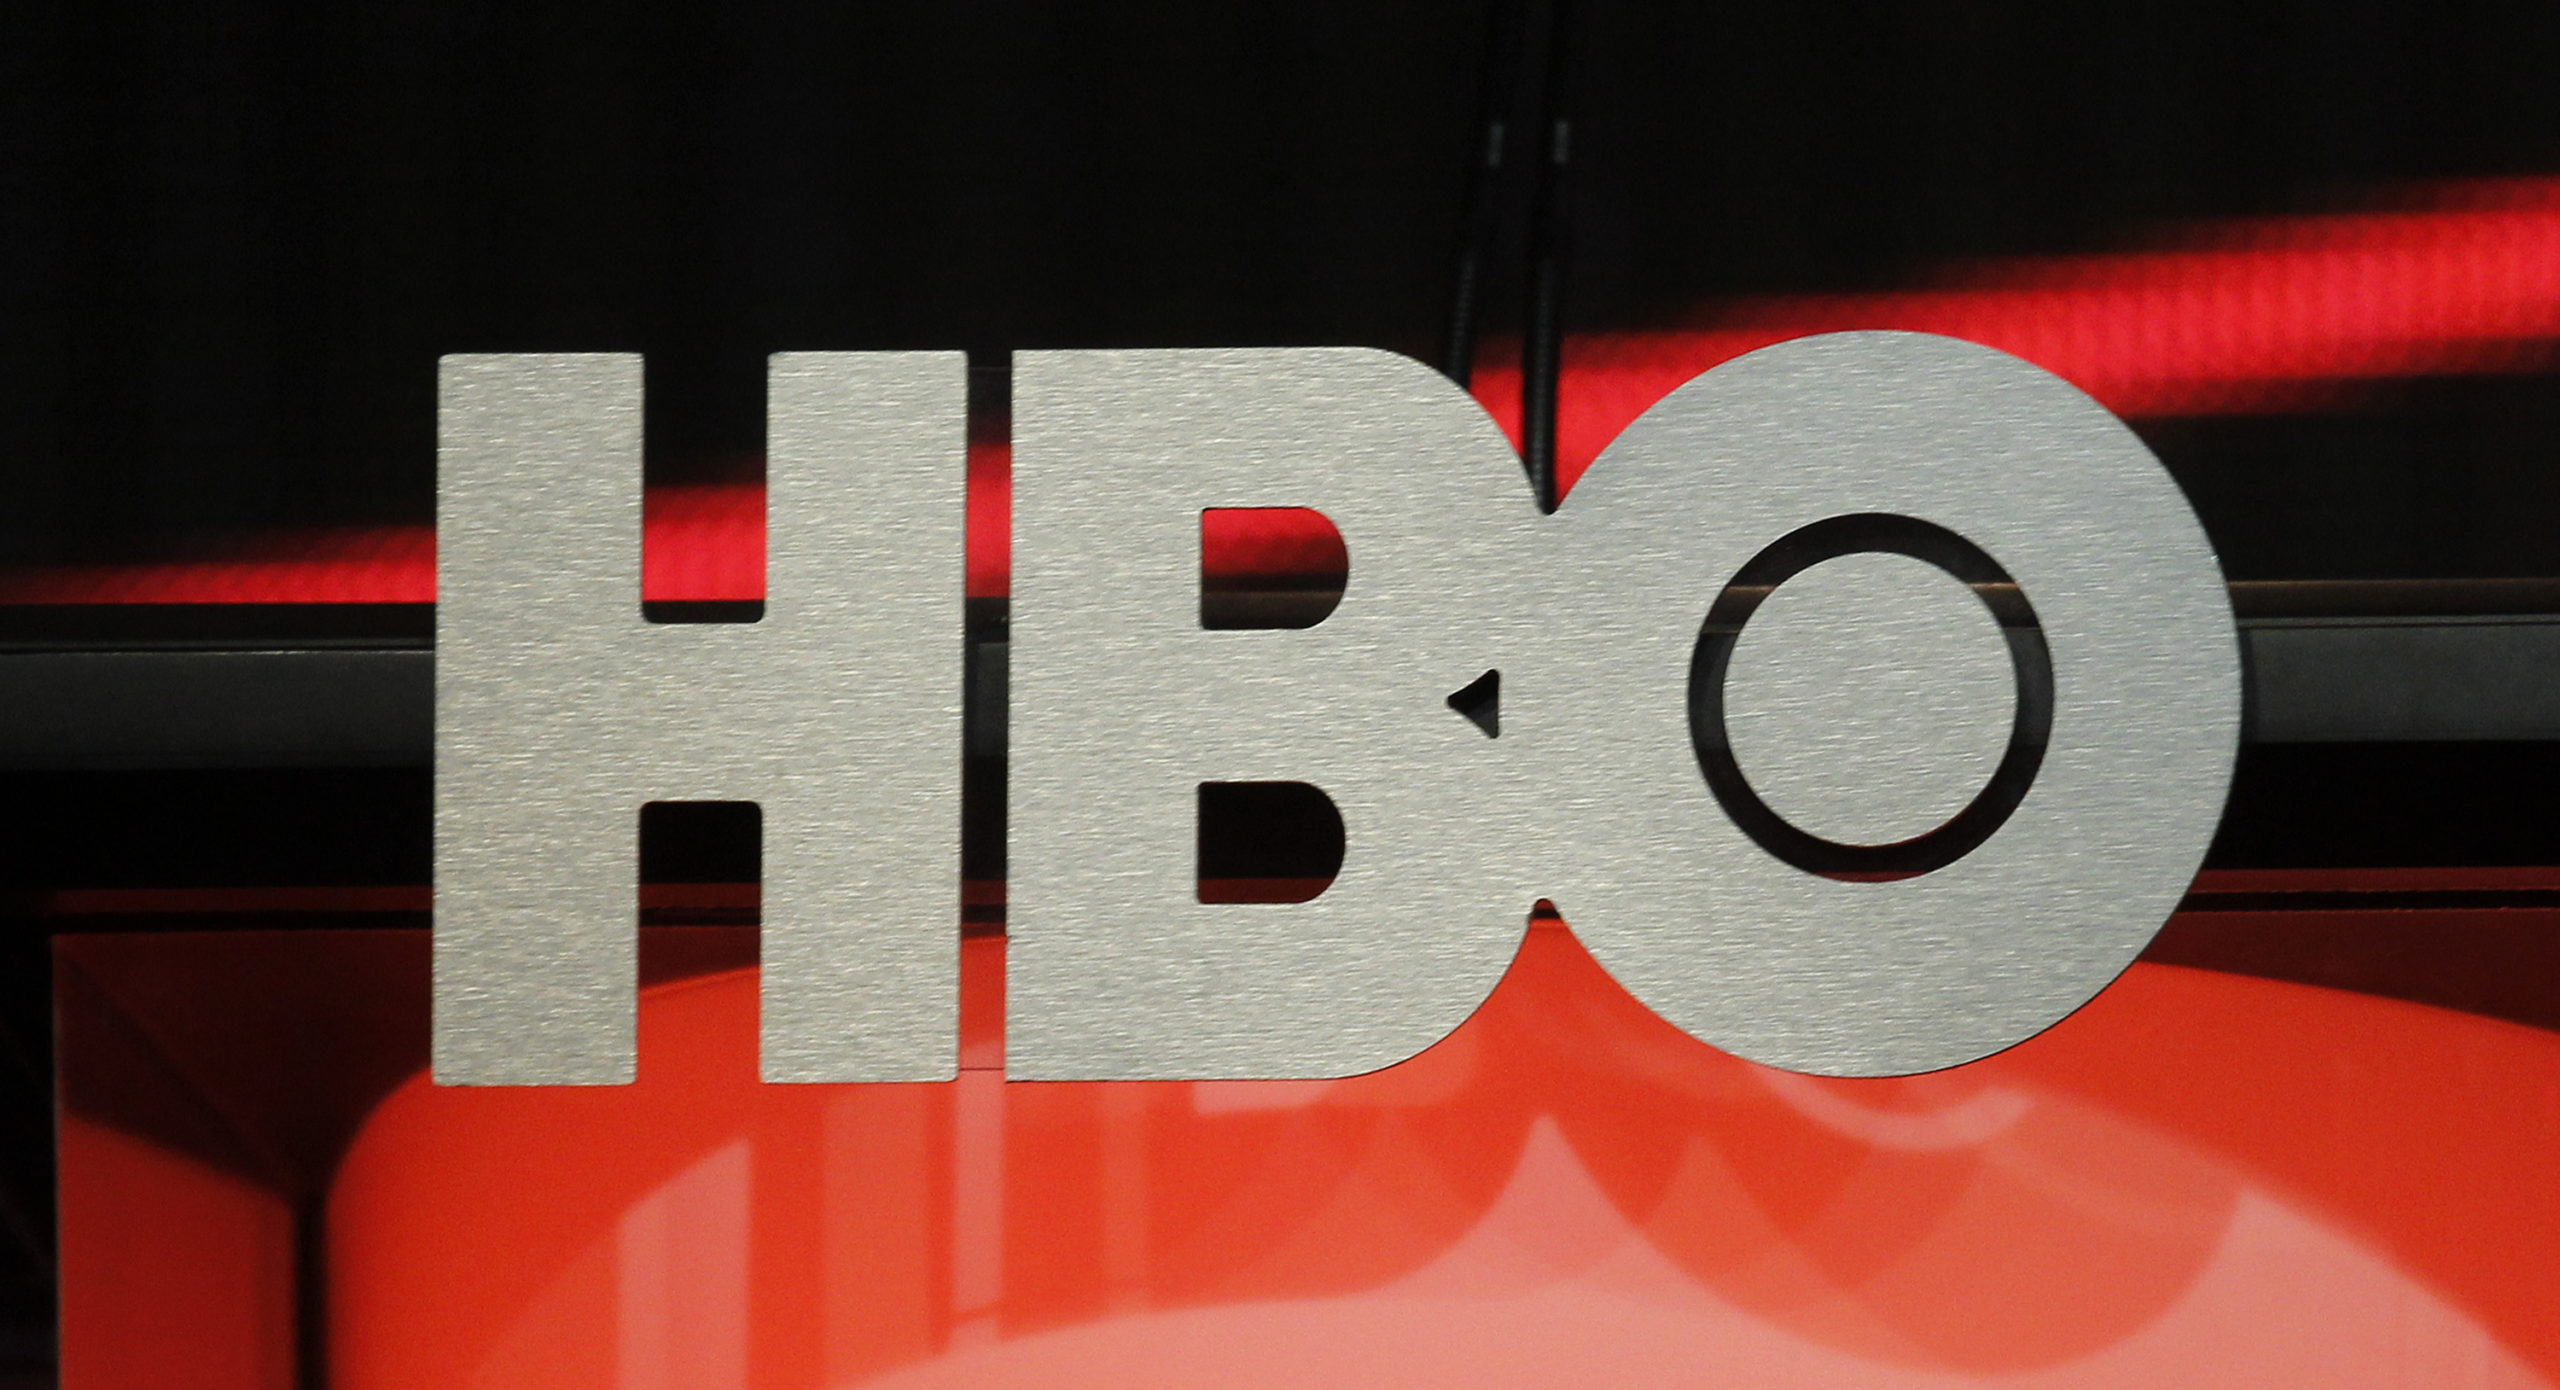 The logo for HBO,Home Box Office, the American premium cable television network, owned by Time Warner, is pictured during the HBO presentation at the Cable portion of the Television Critics Association Summer press tour in Beverly Hills, California August 1, 2012. REUTERS/Fred Prouser